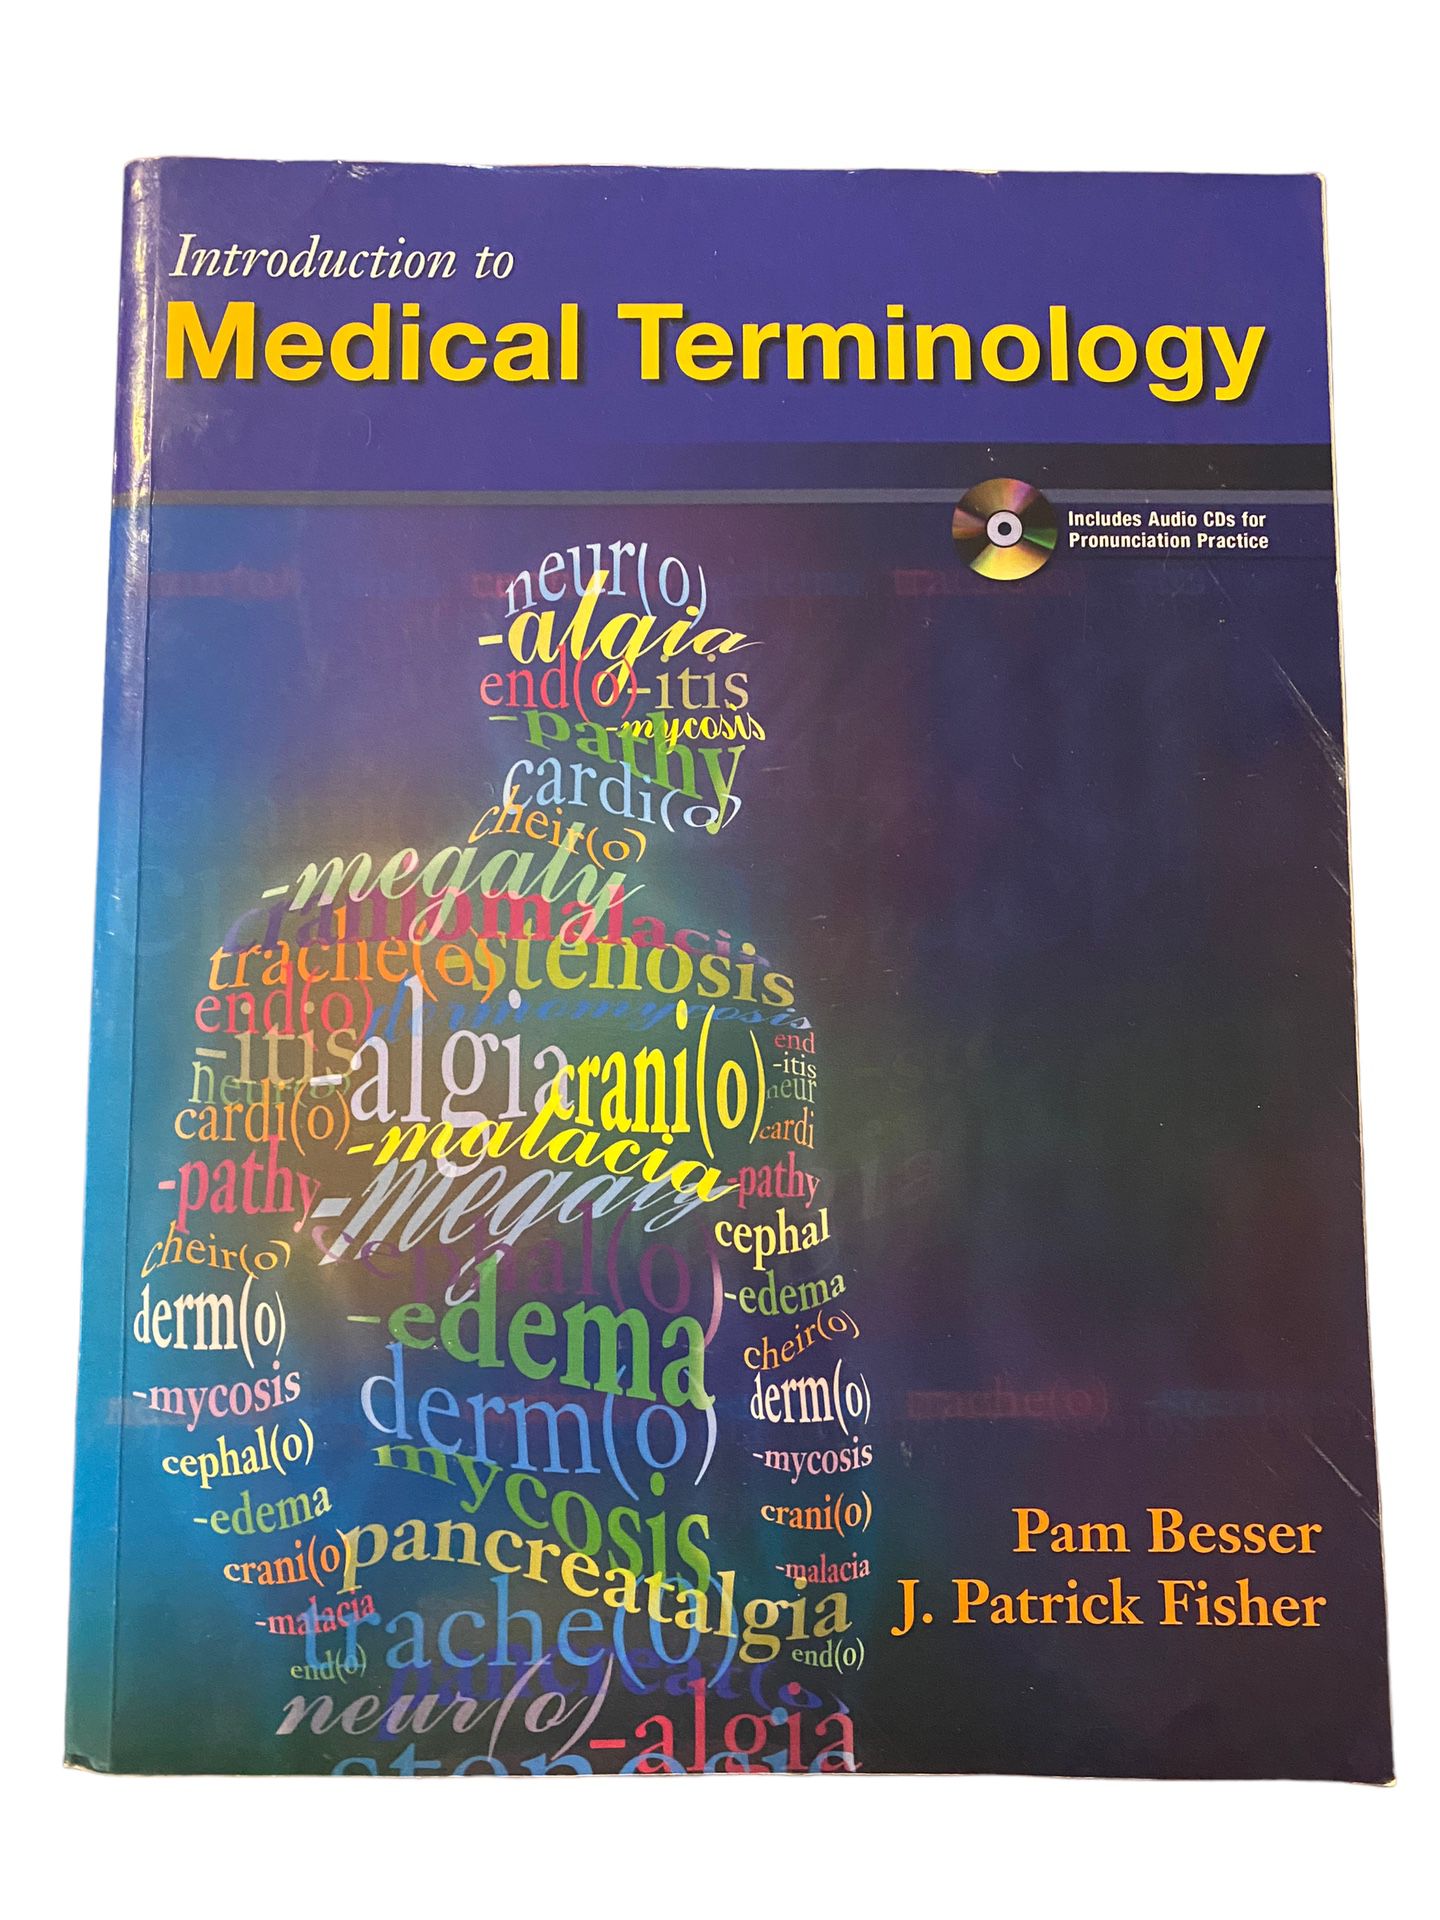 Introduction To Medical Terminology Textbook By Pam Besser And J Patrick Fisher